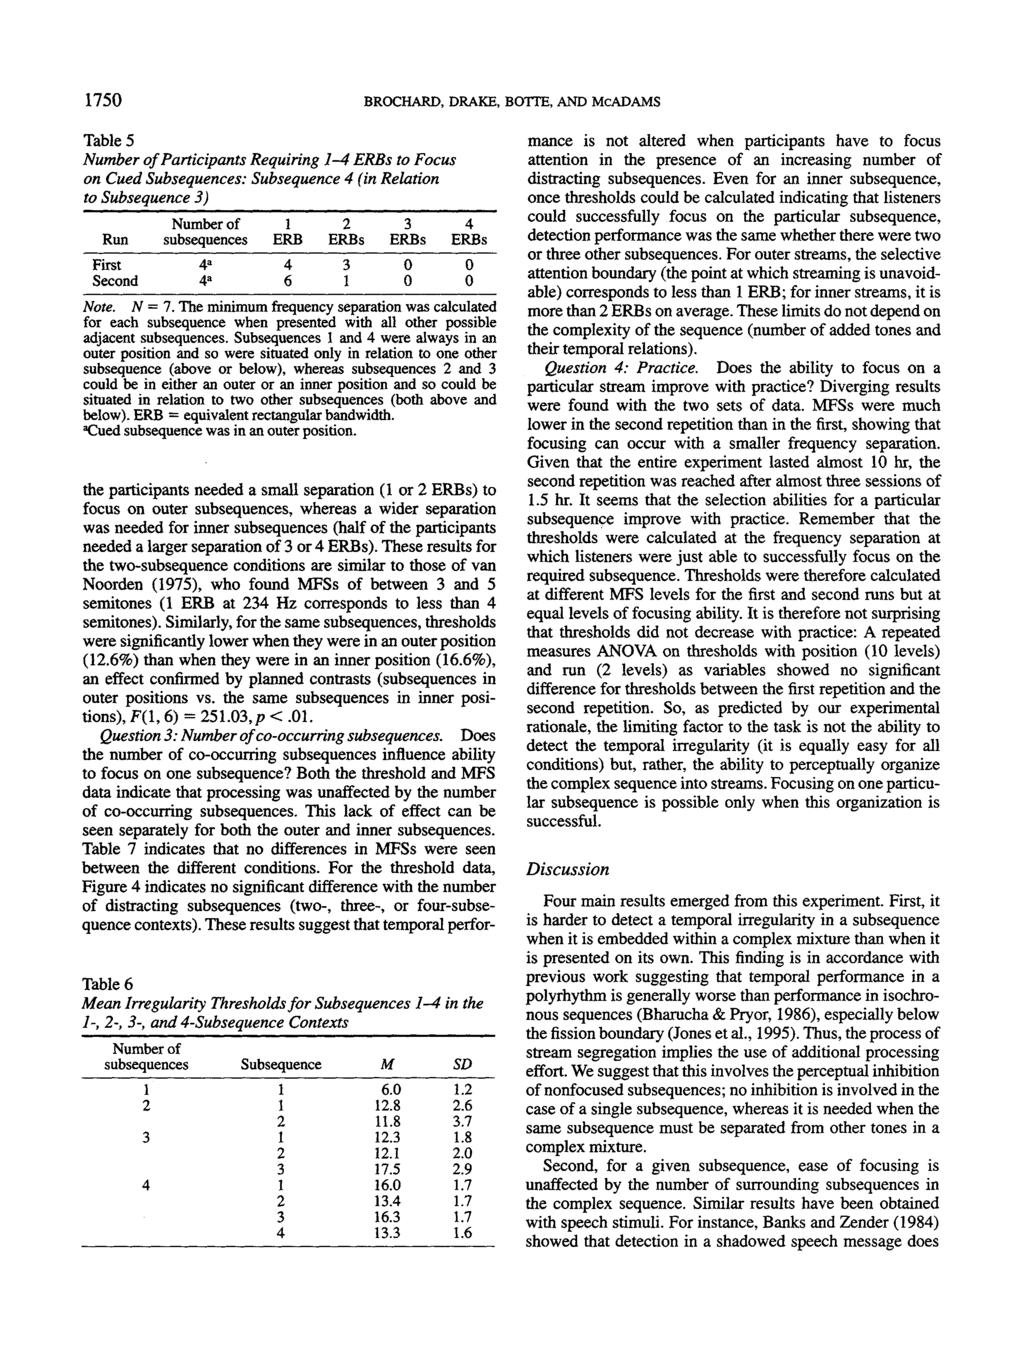 75 BROCHARD, DRAKE, BOTTE, AND McADAMS Table 5 Number of Participants Requiring - ERBs to Focus on Cued Subsequences: Subsequence (in Relation to Subsequence ) Number o f Run subsequences ERB ERBs